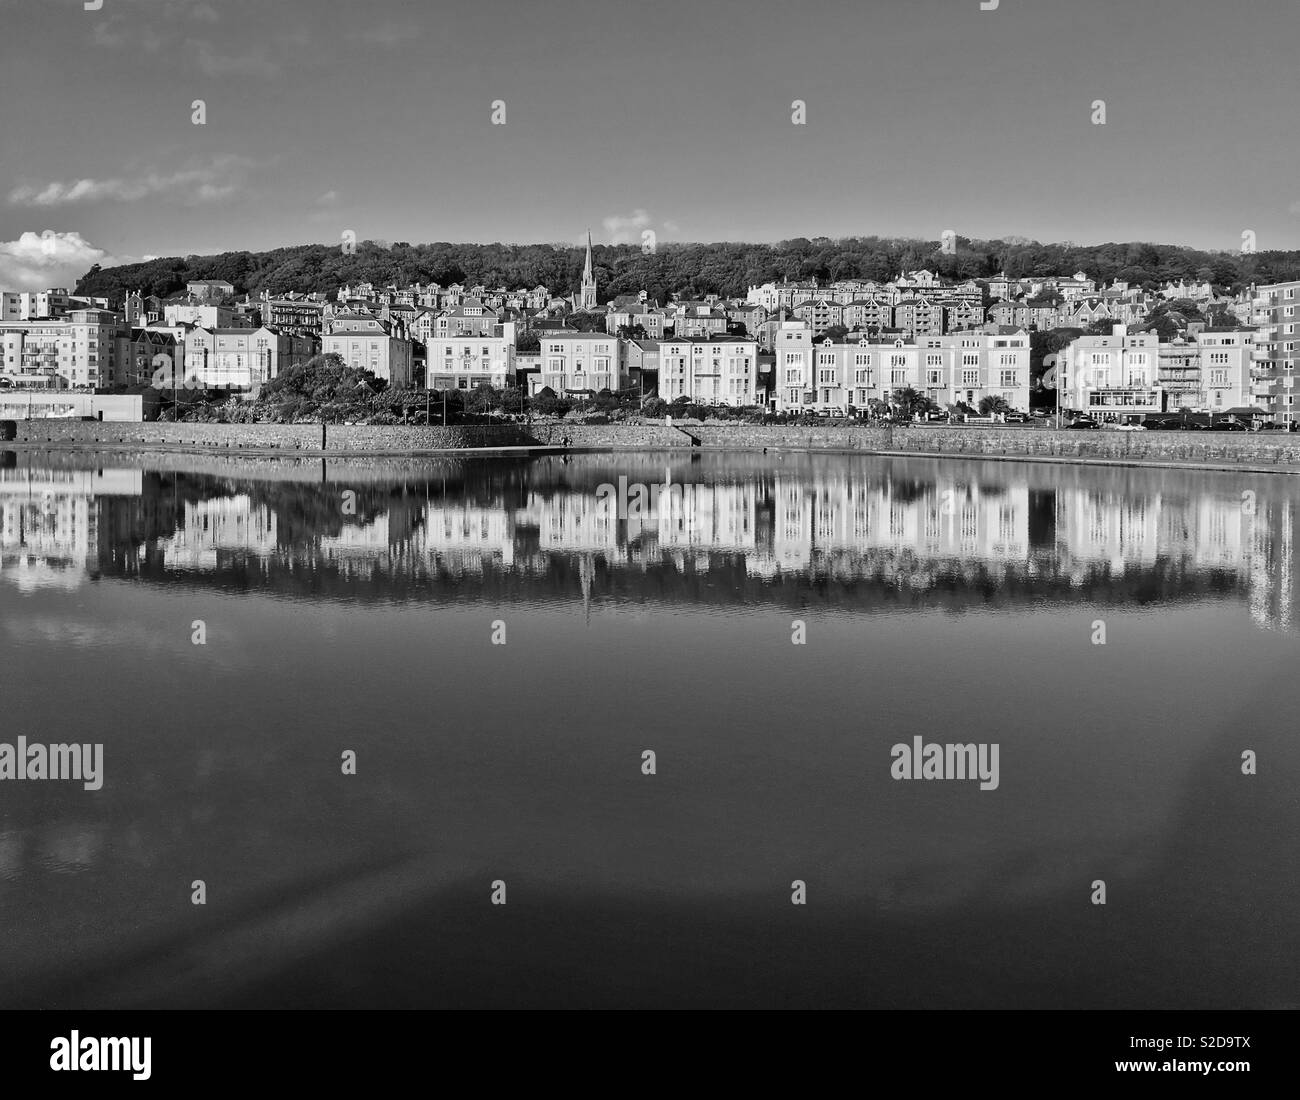 Buildings on the hillside reflected in the Marine Lake in Weston-super-Mare, UK Stock Photo